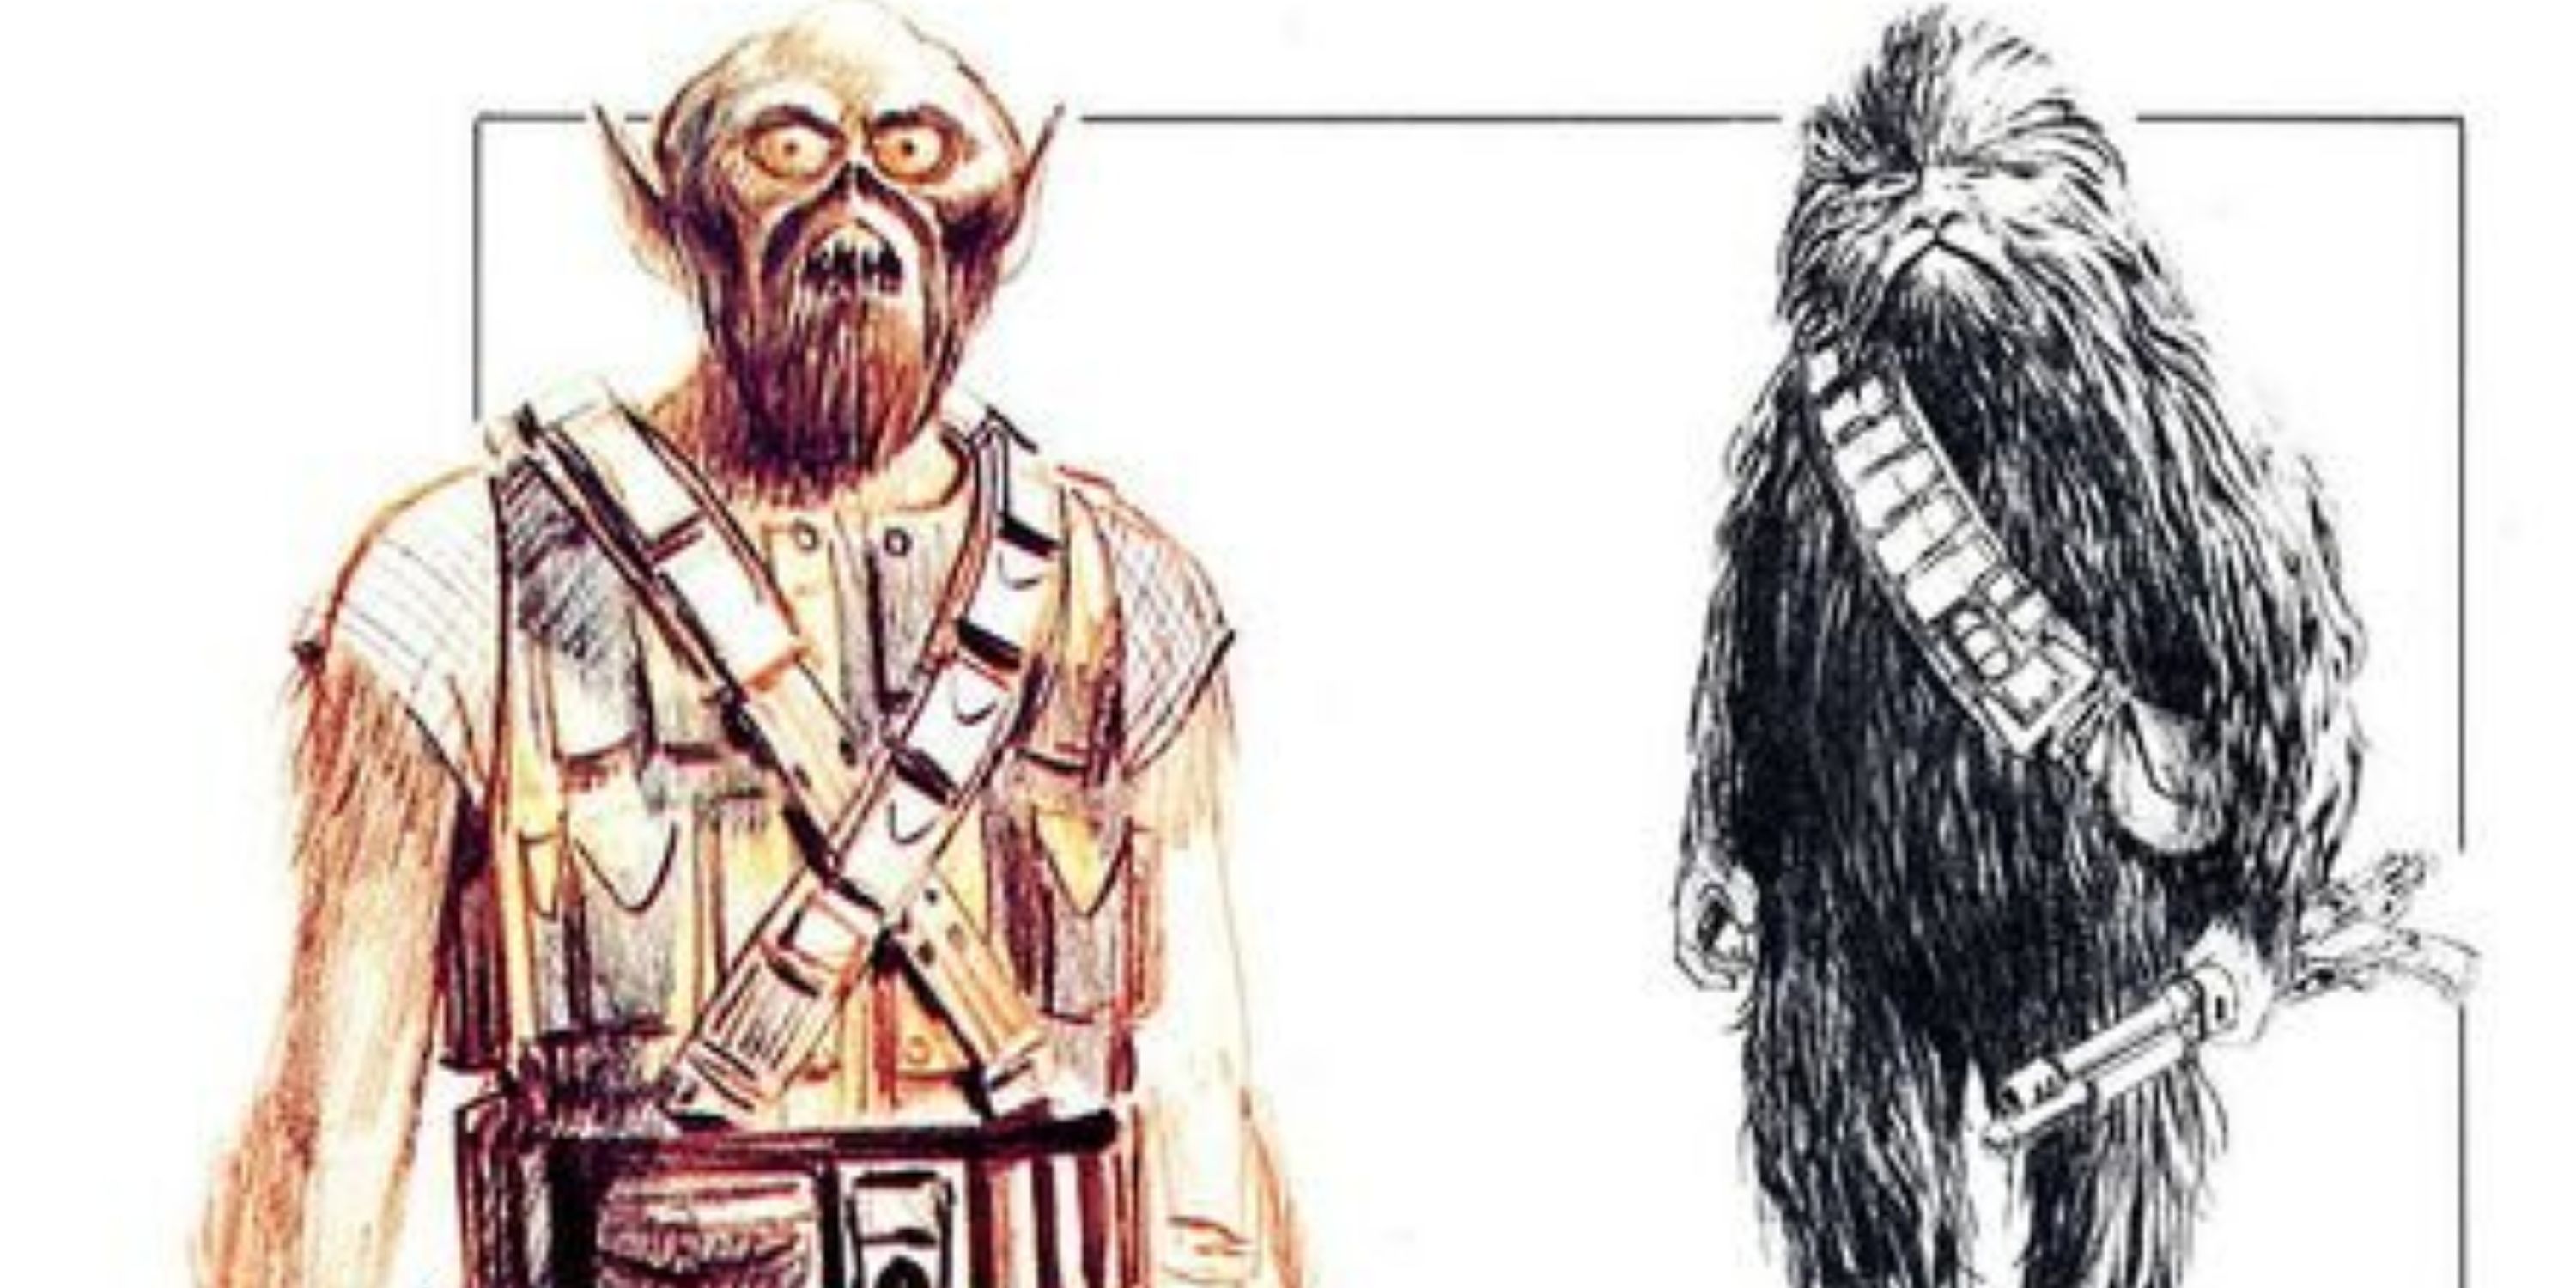 ralph mcquarrie's concept art for chewbacca